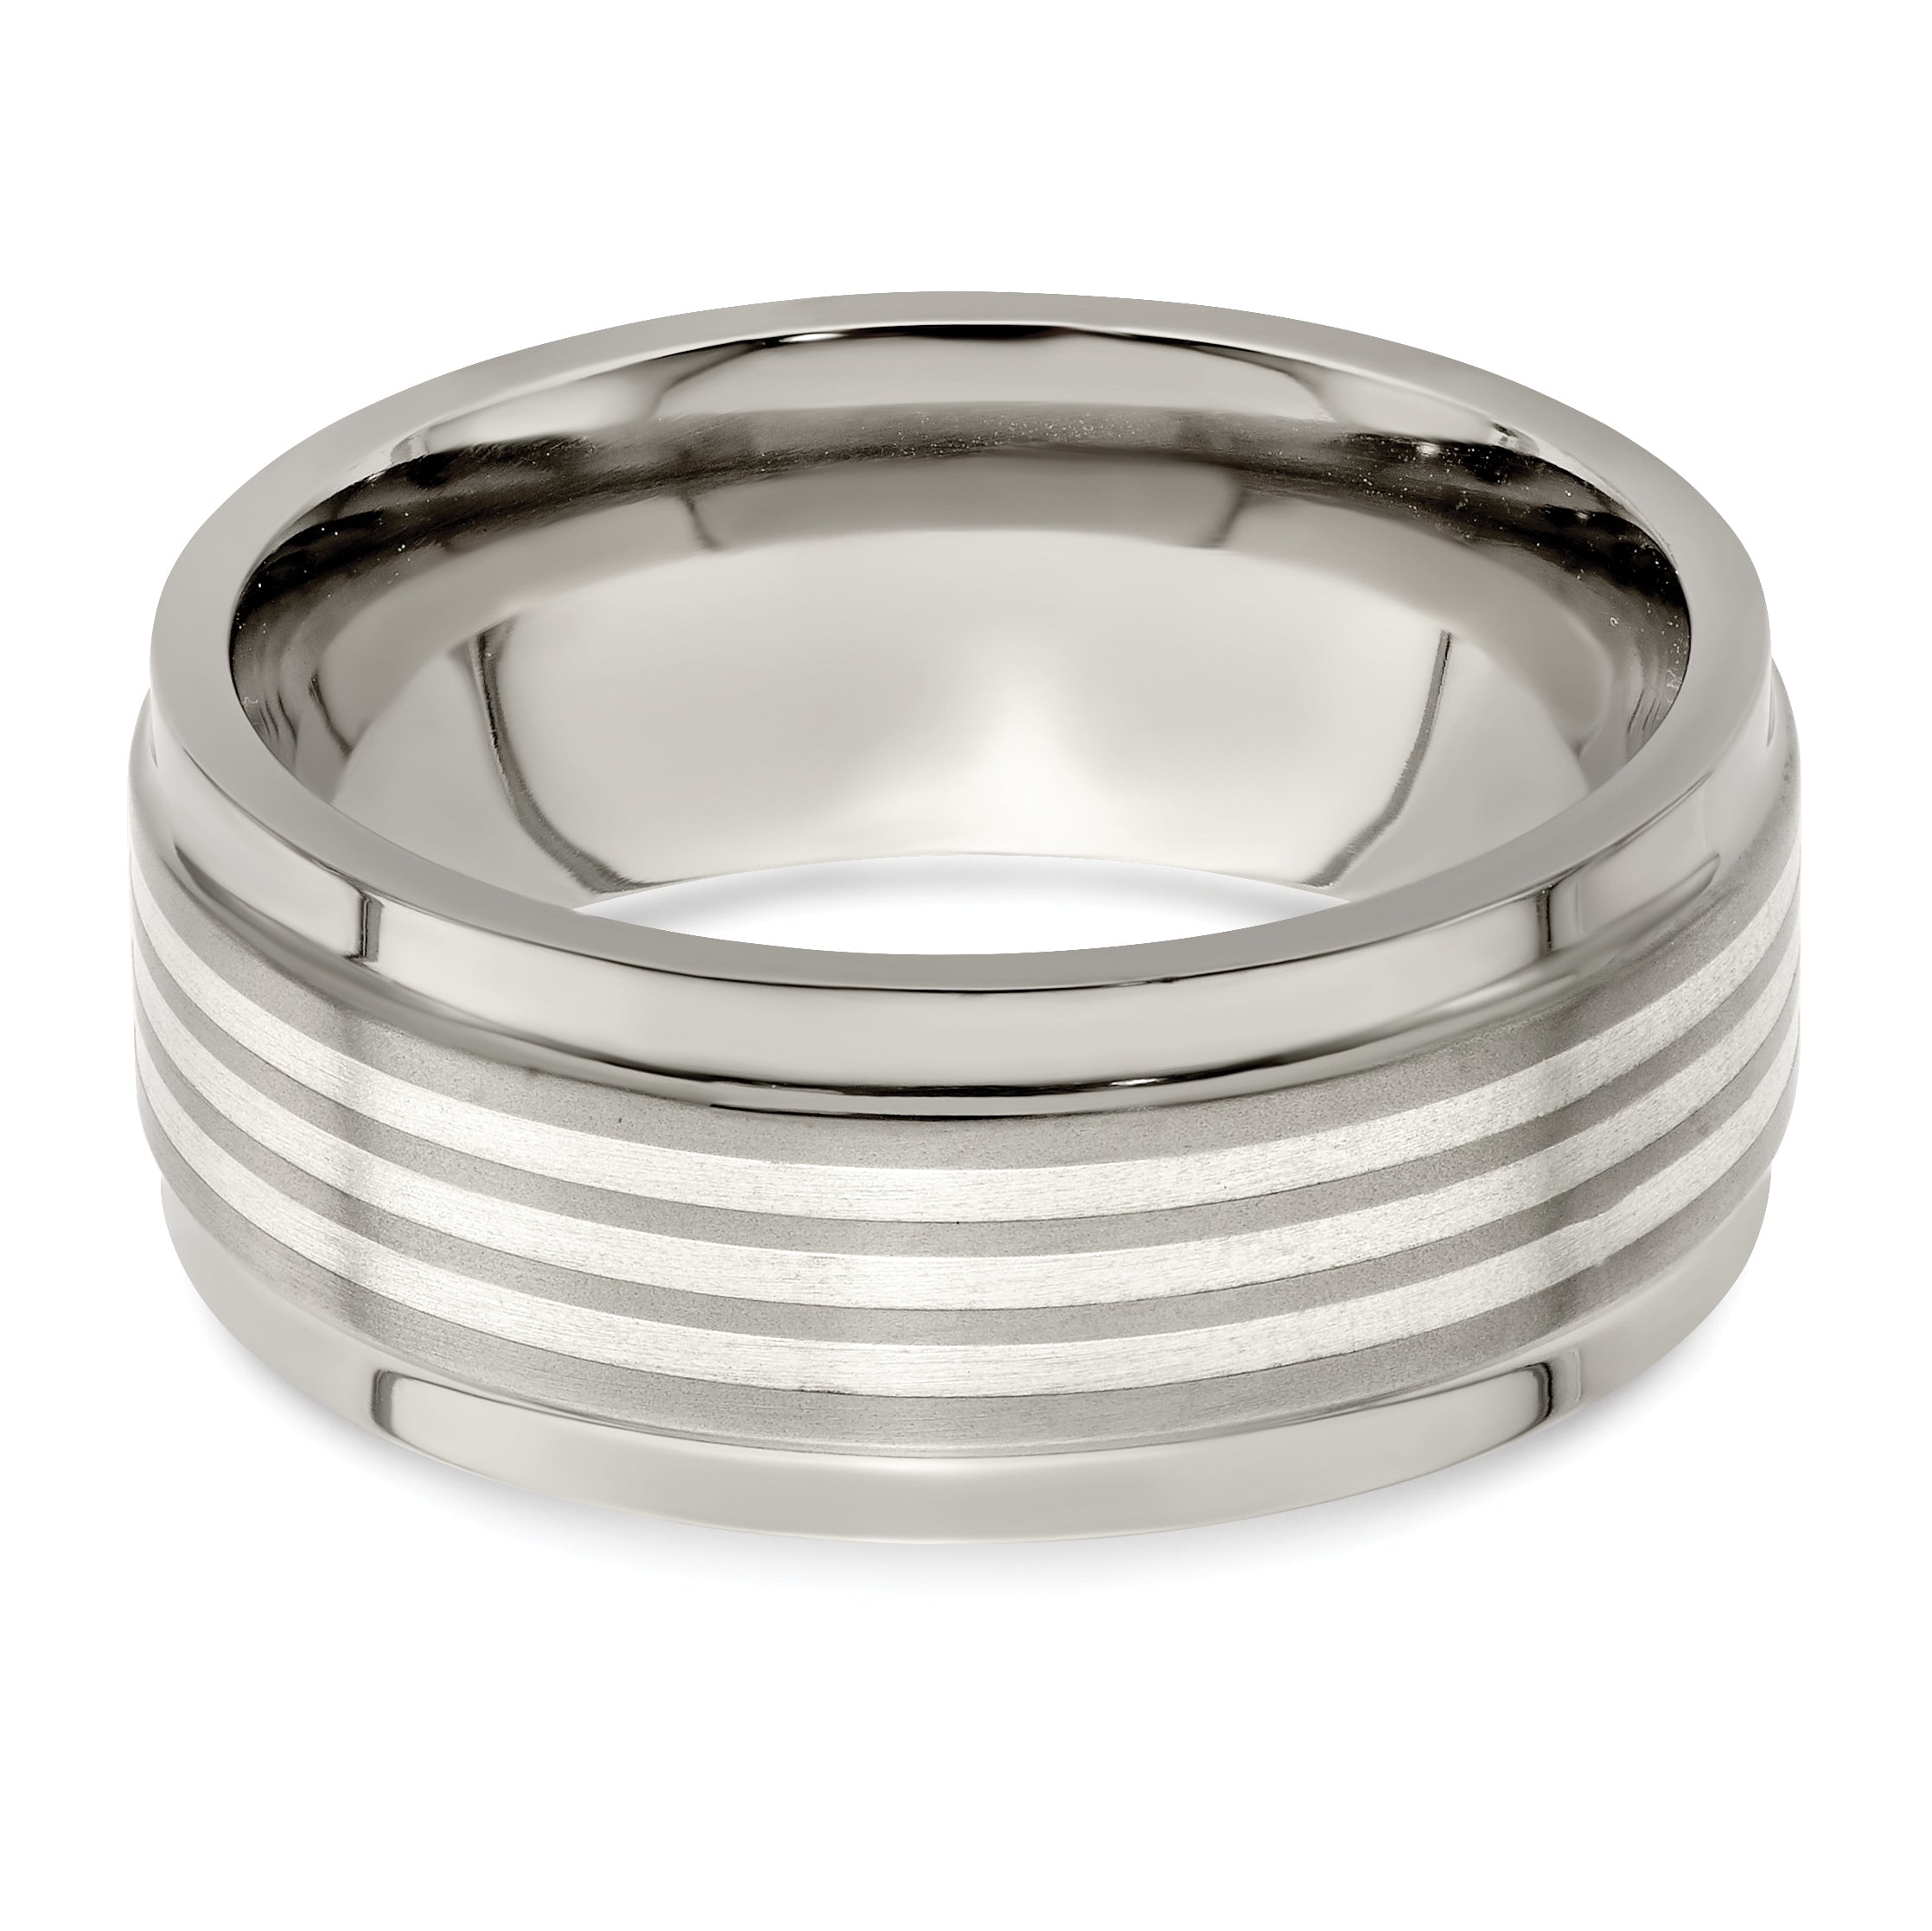 Edward Mirell Titanium WithSterling Silver Inlay Beveled Edge 9mm Band